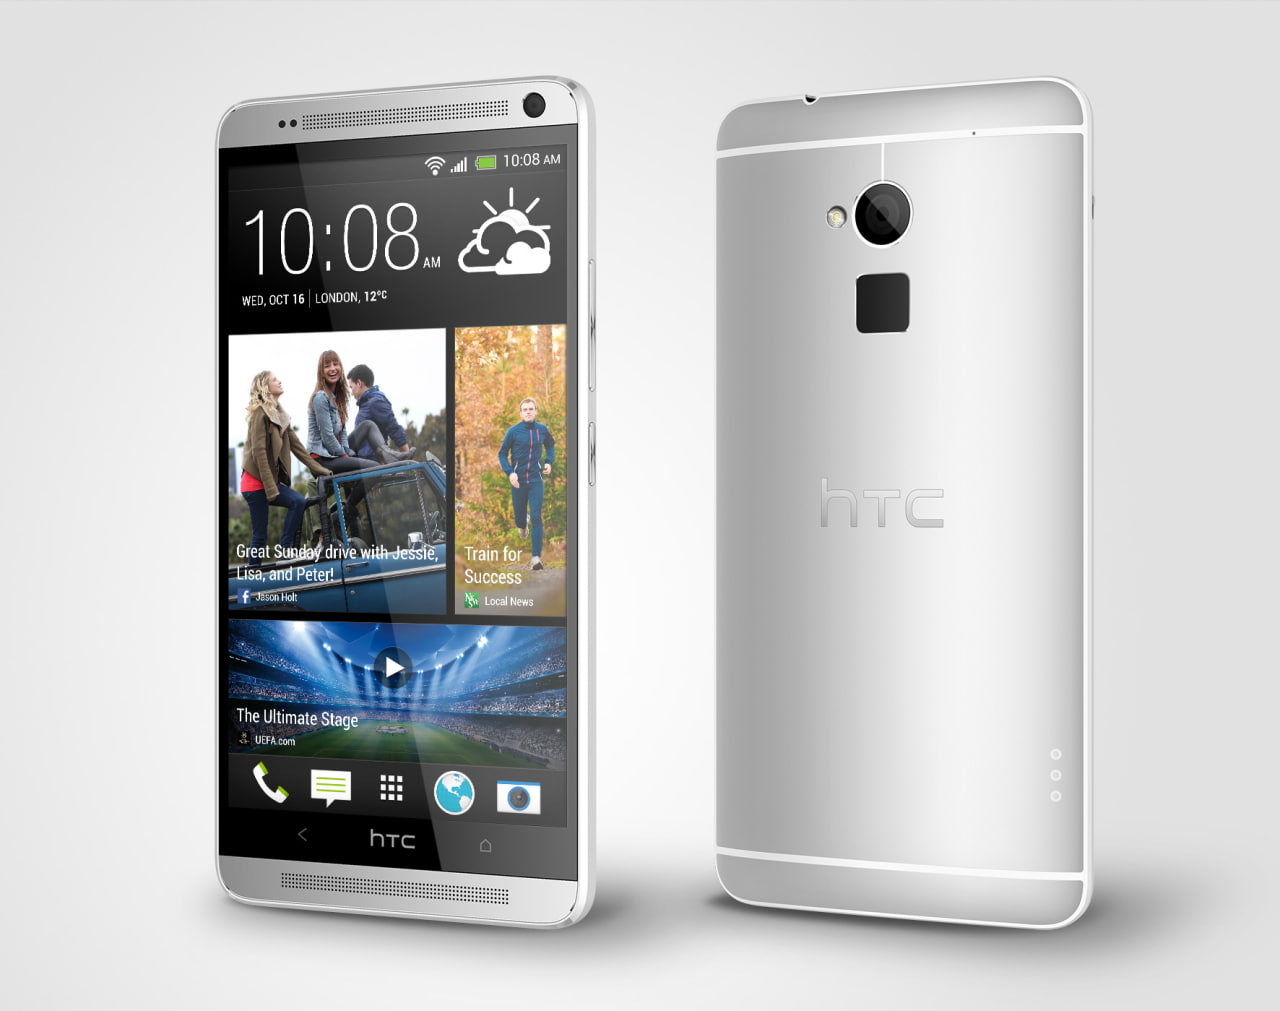 Htc Unveils Htc One Max Smartphone With Fingerprint Scanner Iclarified